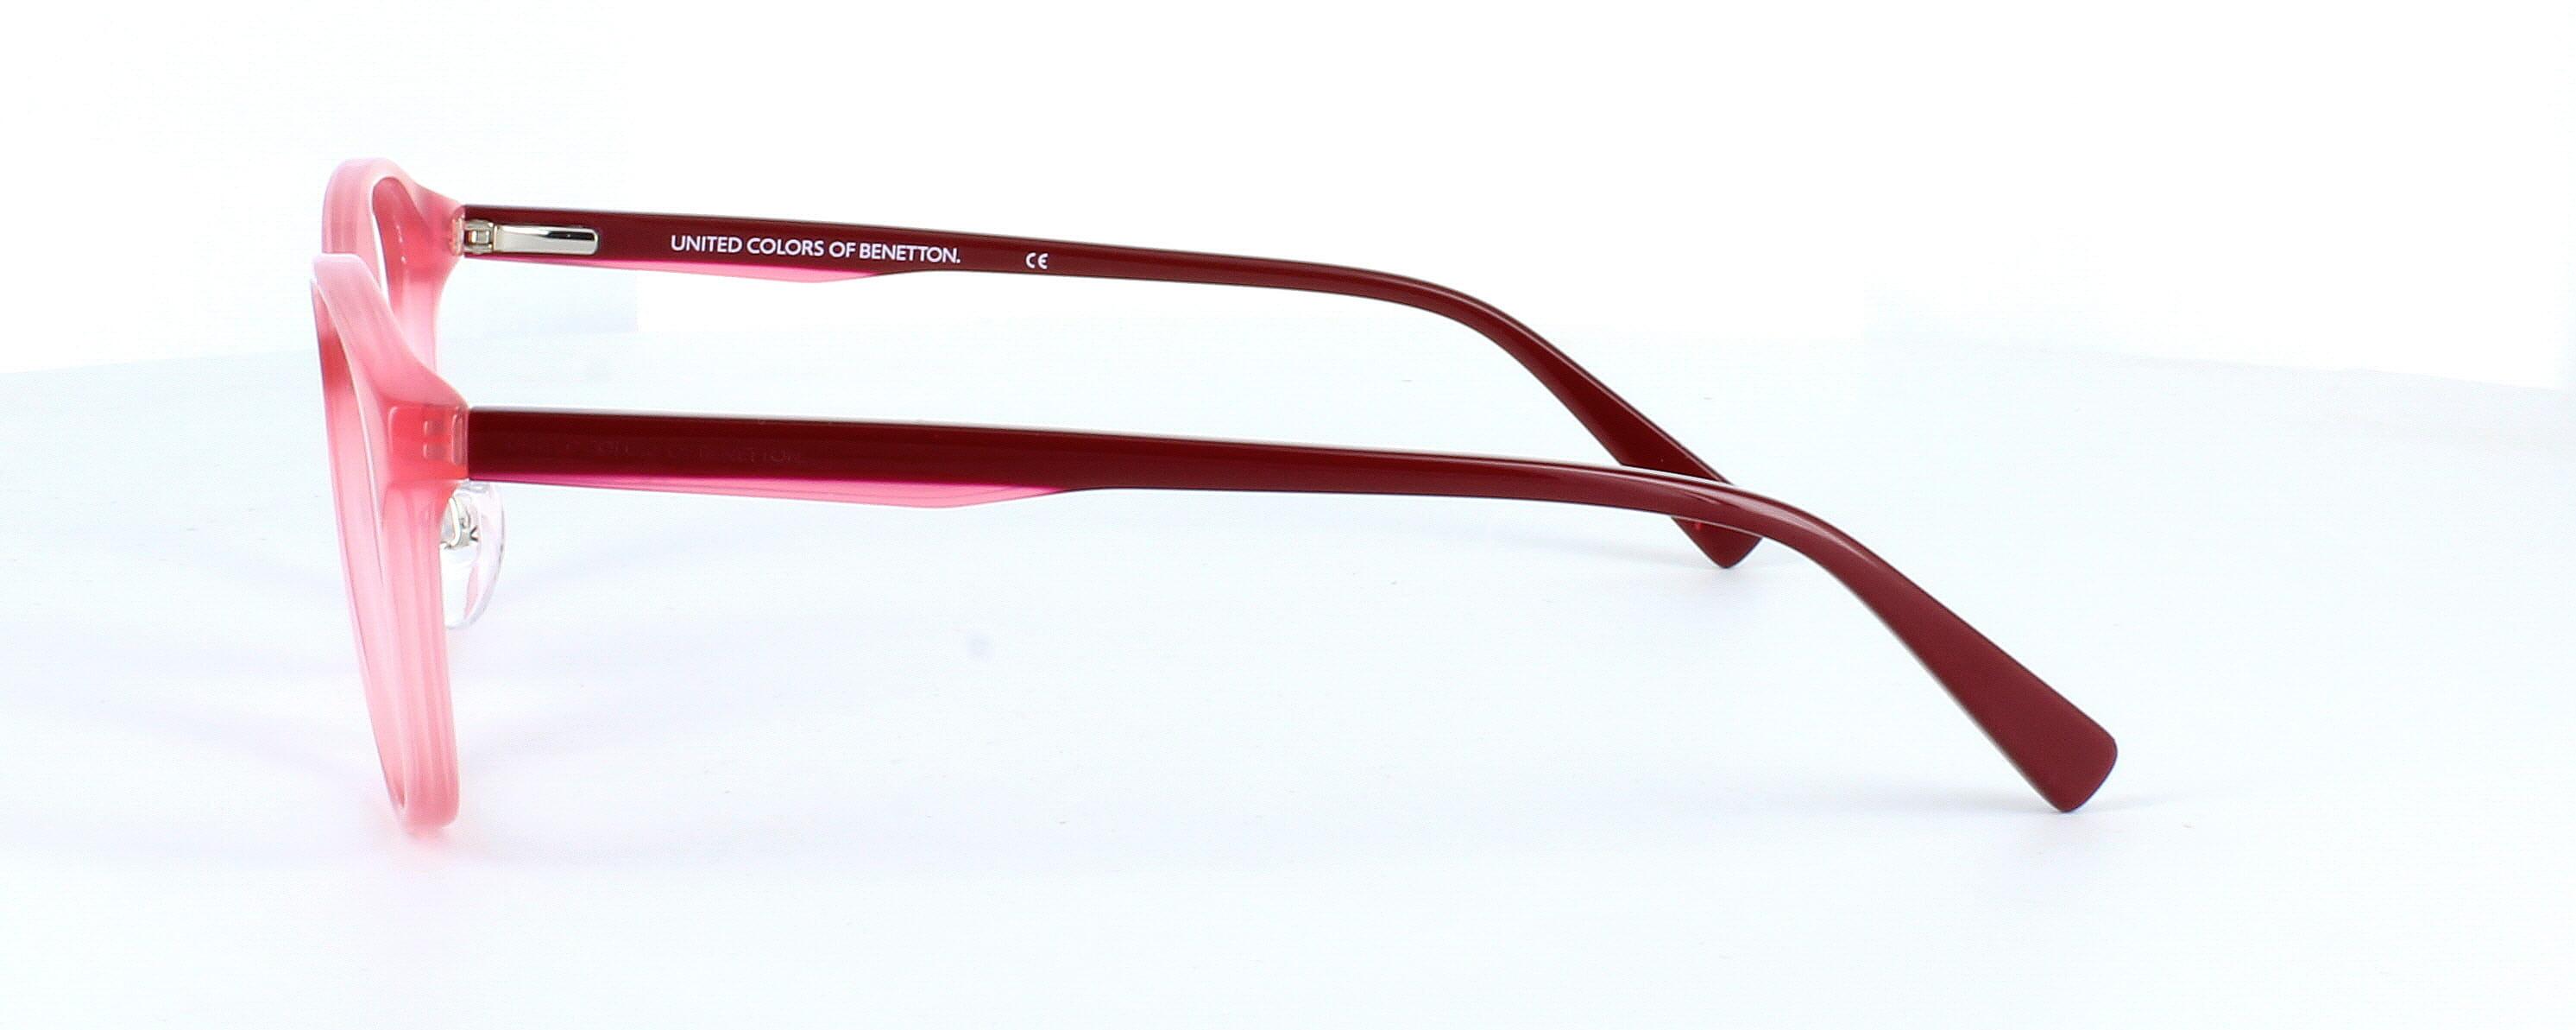 Benetton BEO1007 283 - Women's round plastic crystal pink glasses frame with sprung hinged burgundy arms - image view 3